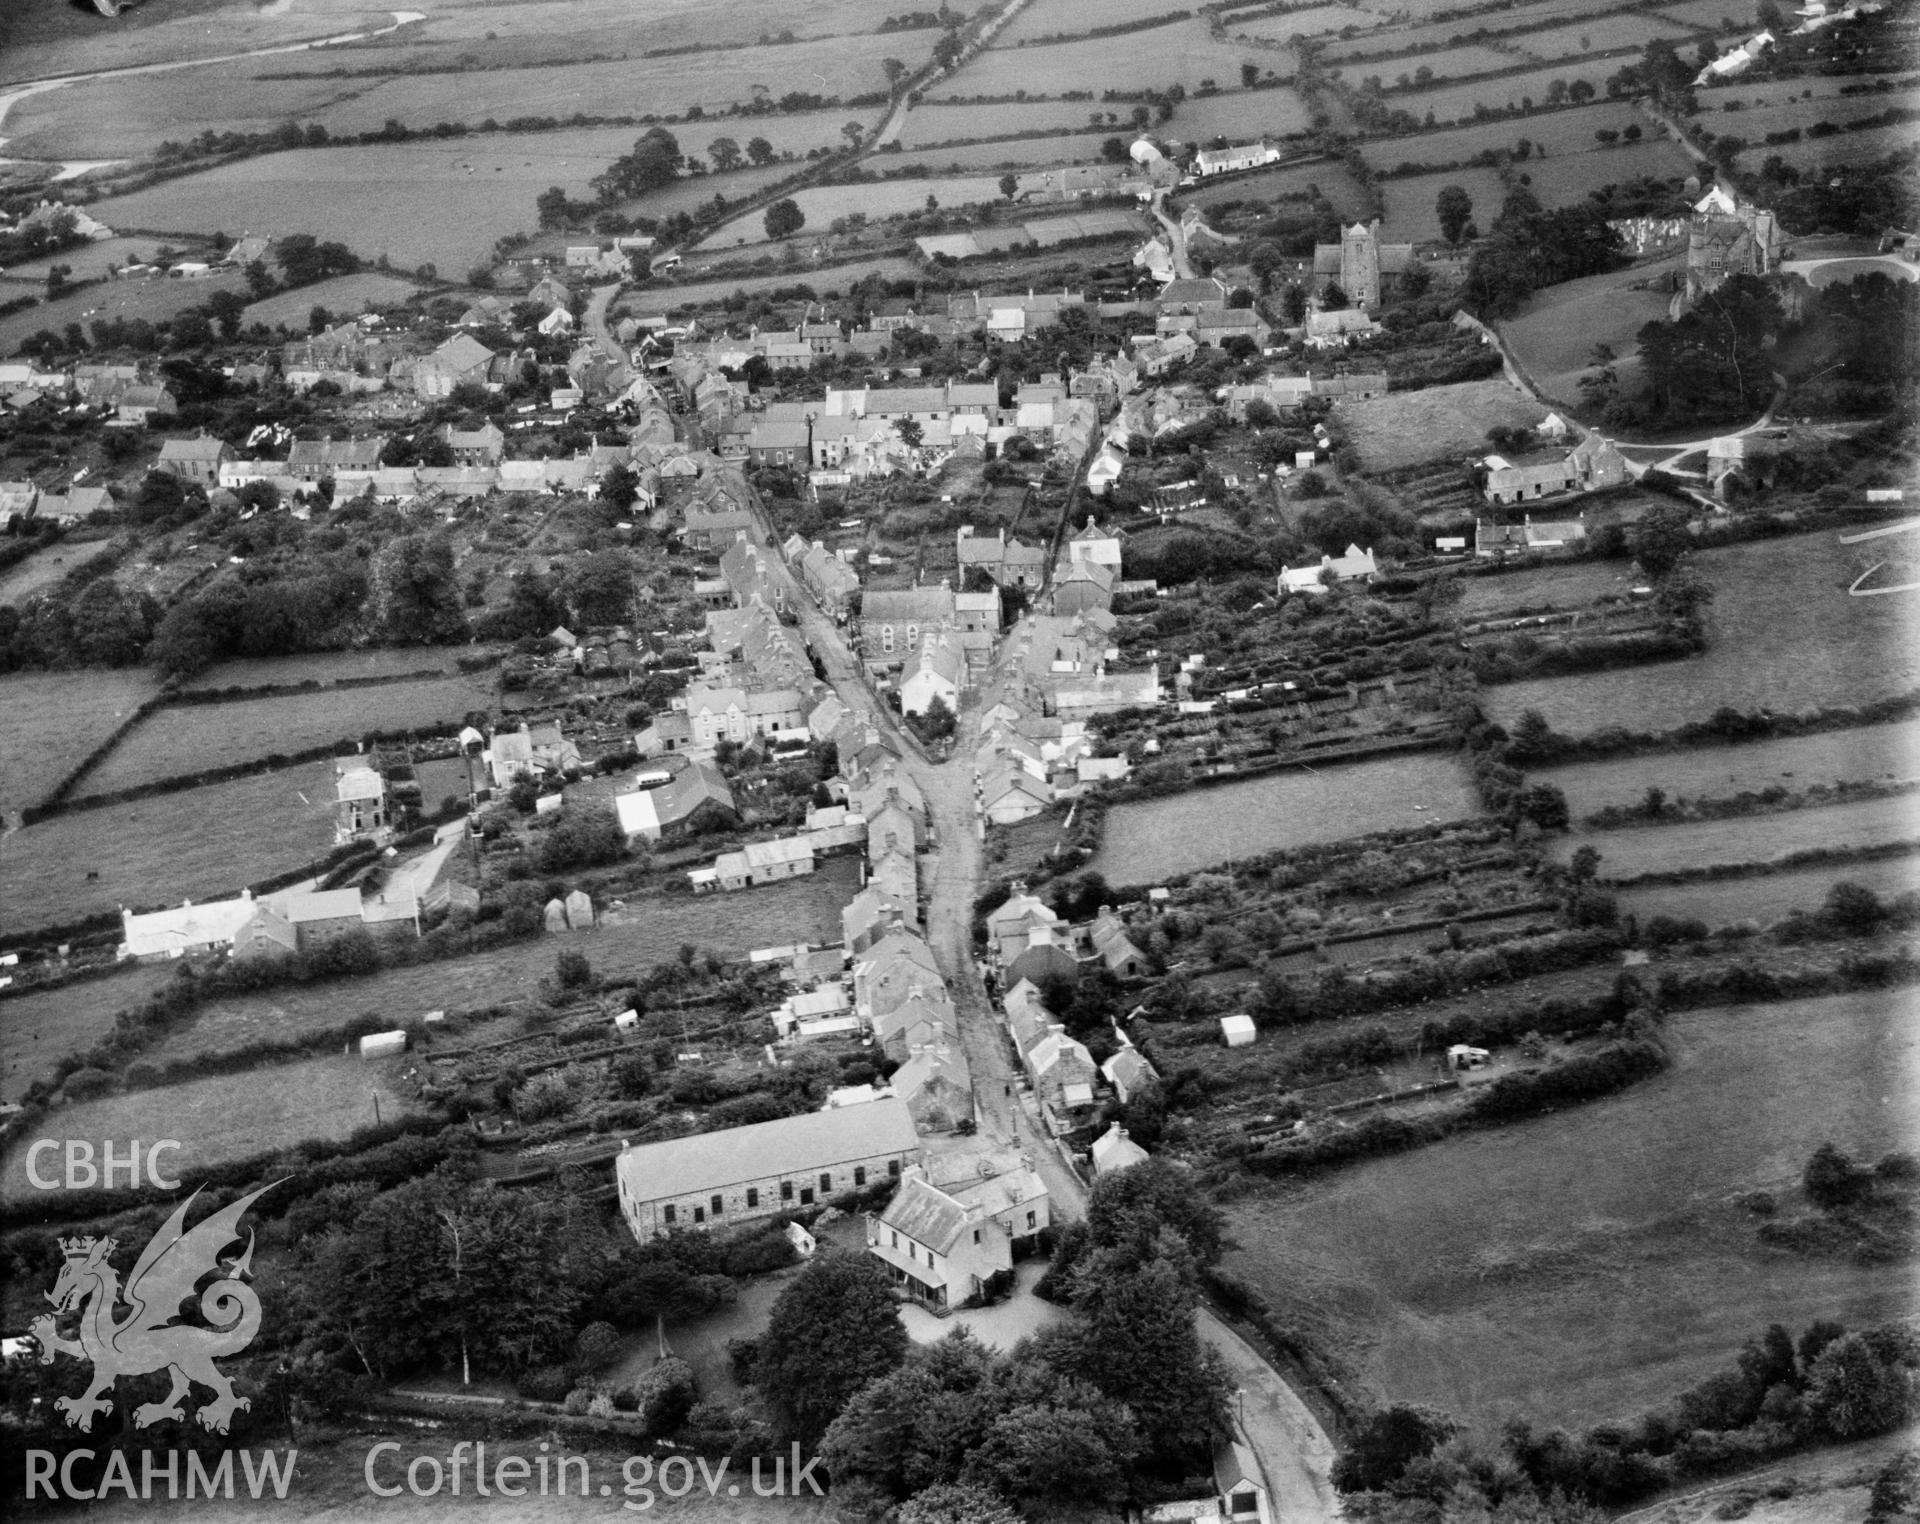 General view of Newport, Pembrokeshire, oblique aerial view. 5?x4? black and white glass plate negative.